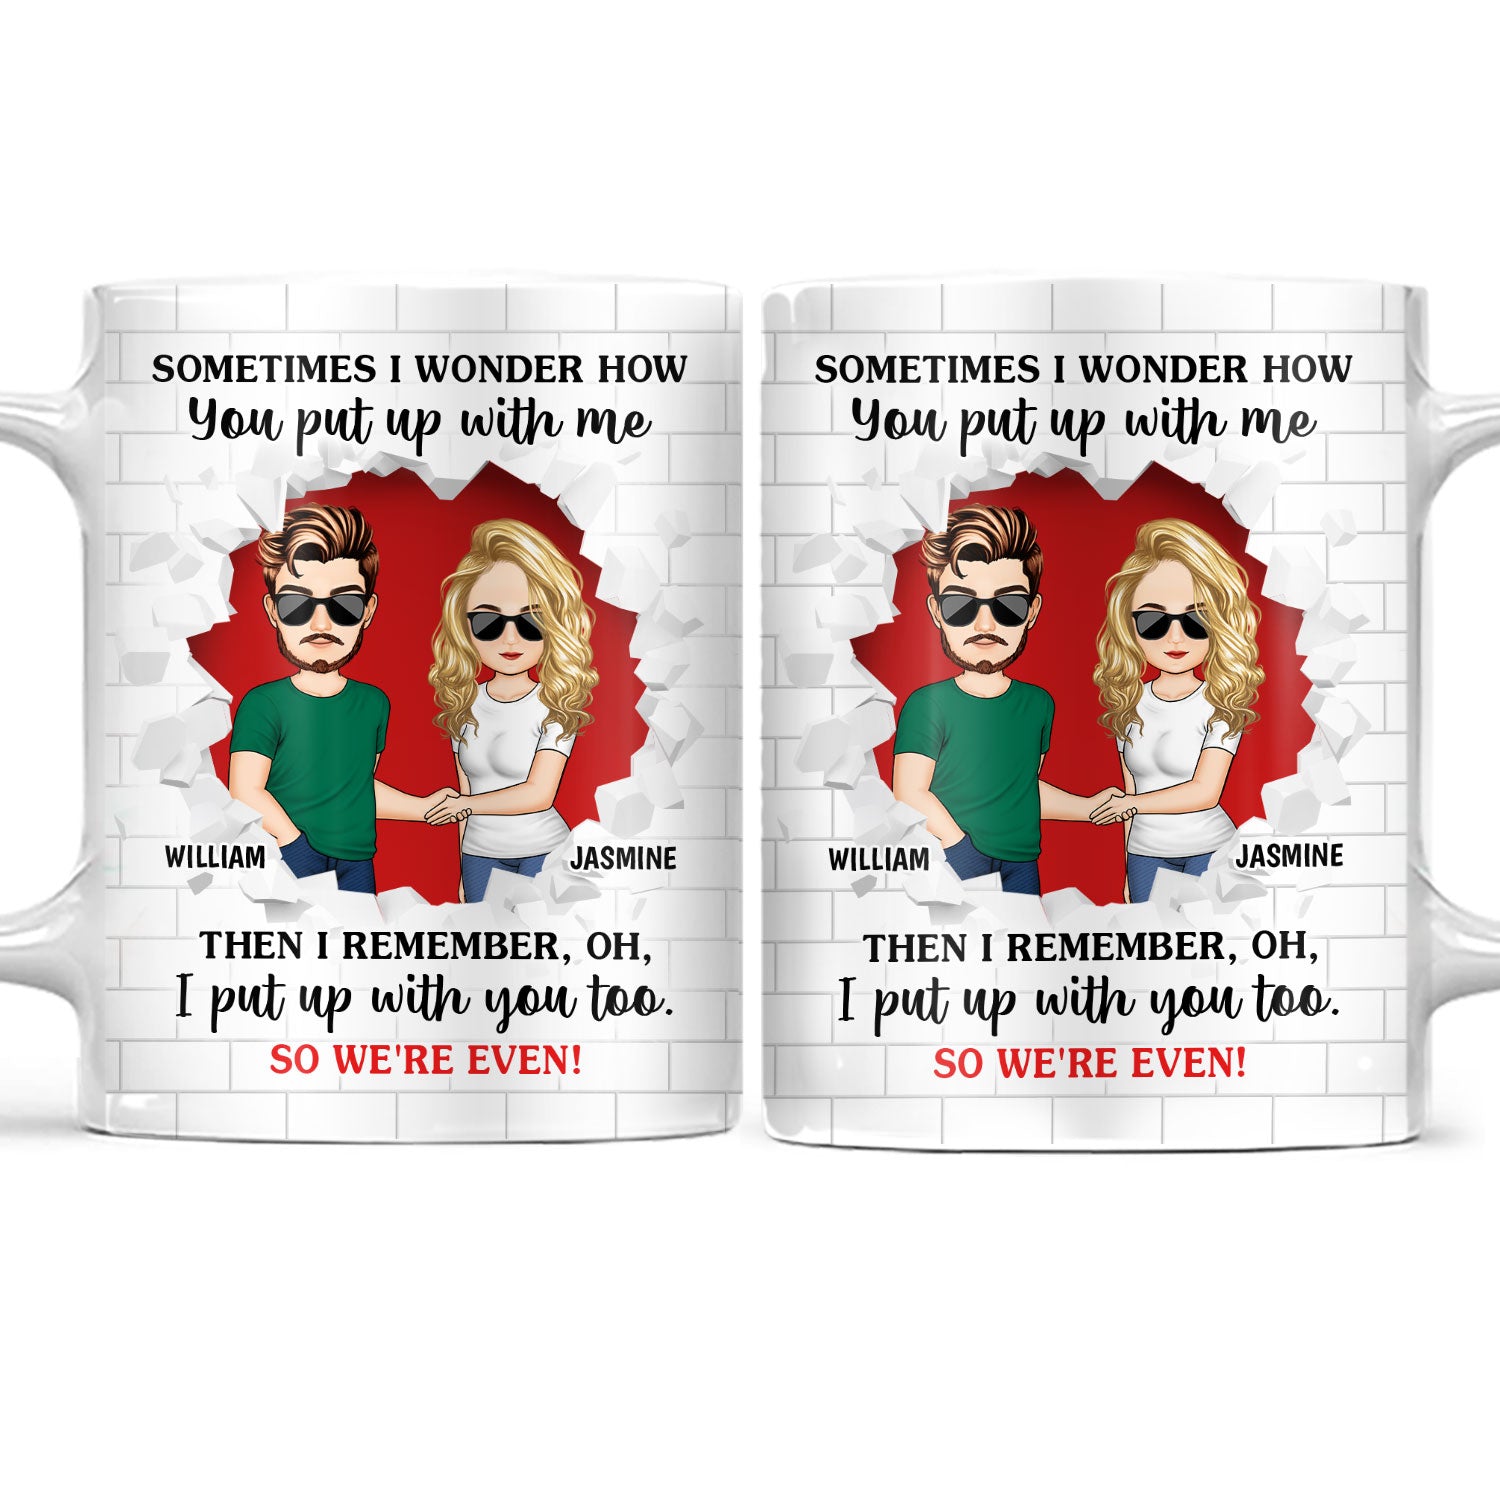 Put Up With Me - Gift For Couples - Personalized White Edge-to-Edge Mug